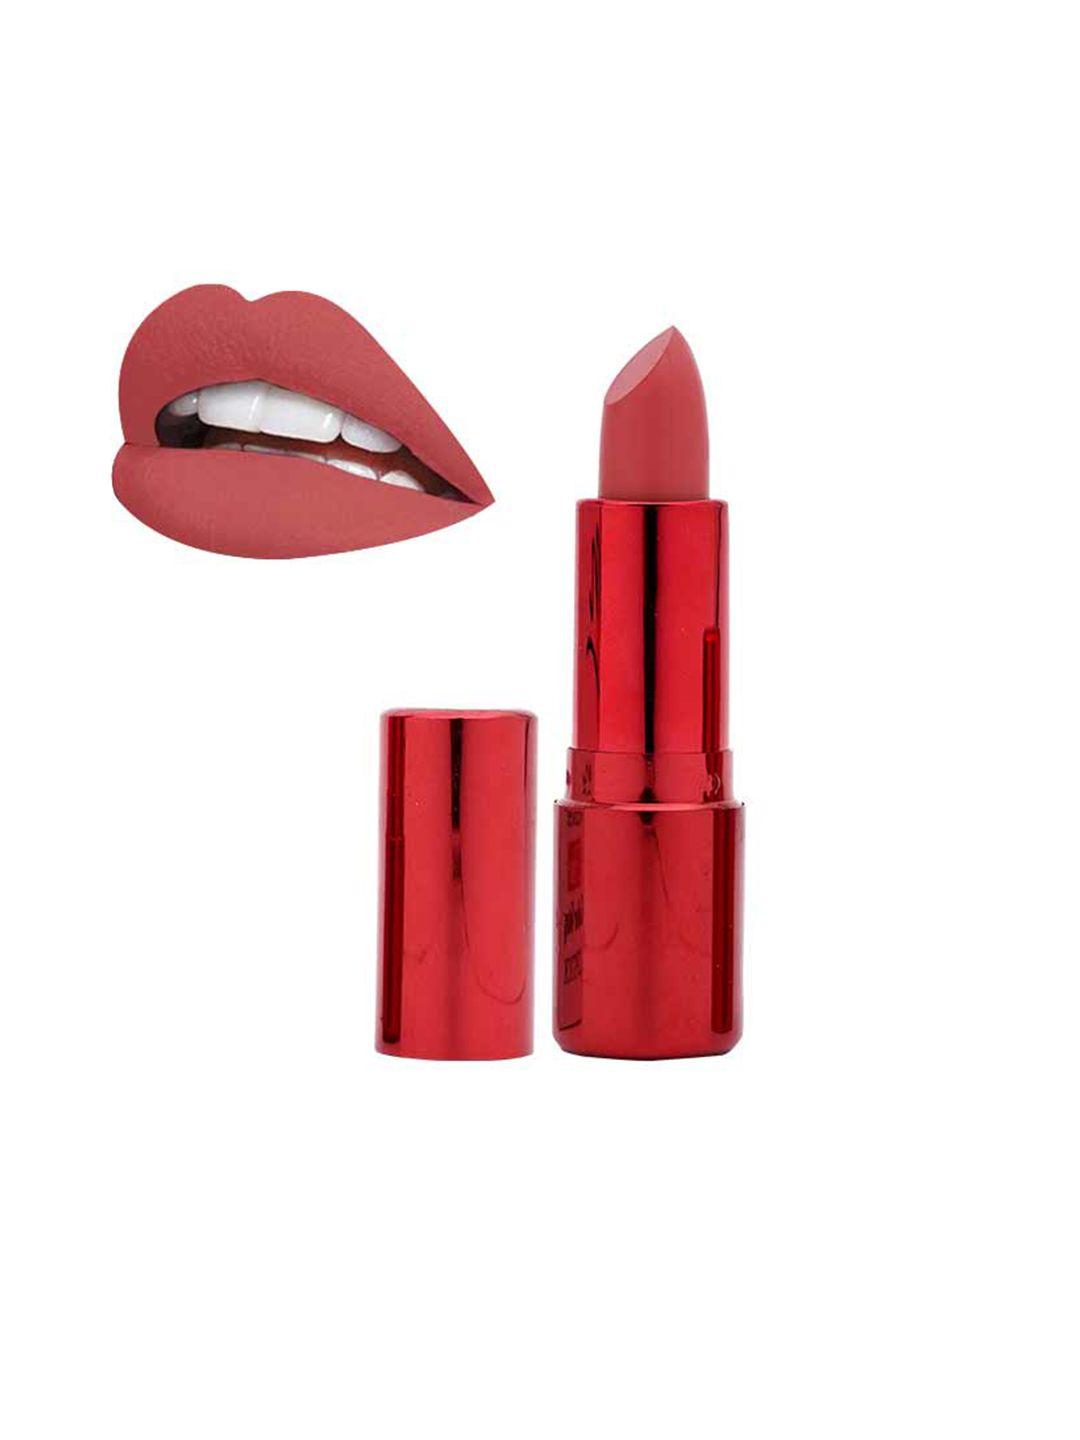 beautyrelay london 12 hour color stay lipstick with vitamin c 3.5g - natural pink